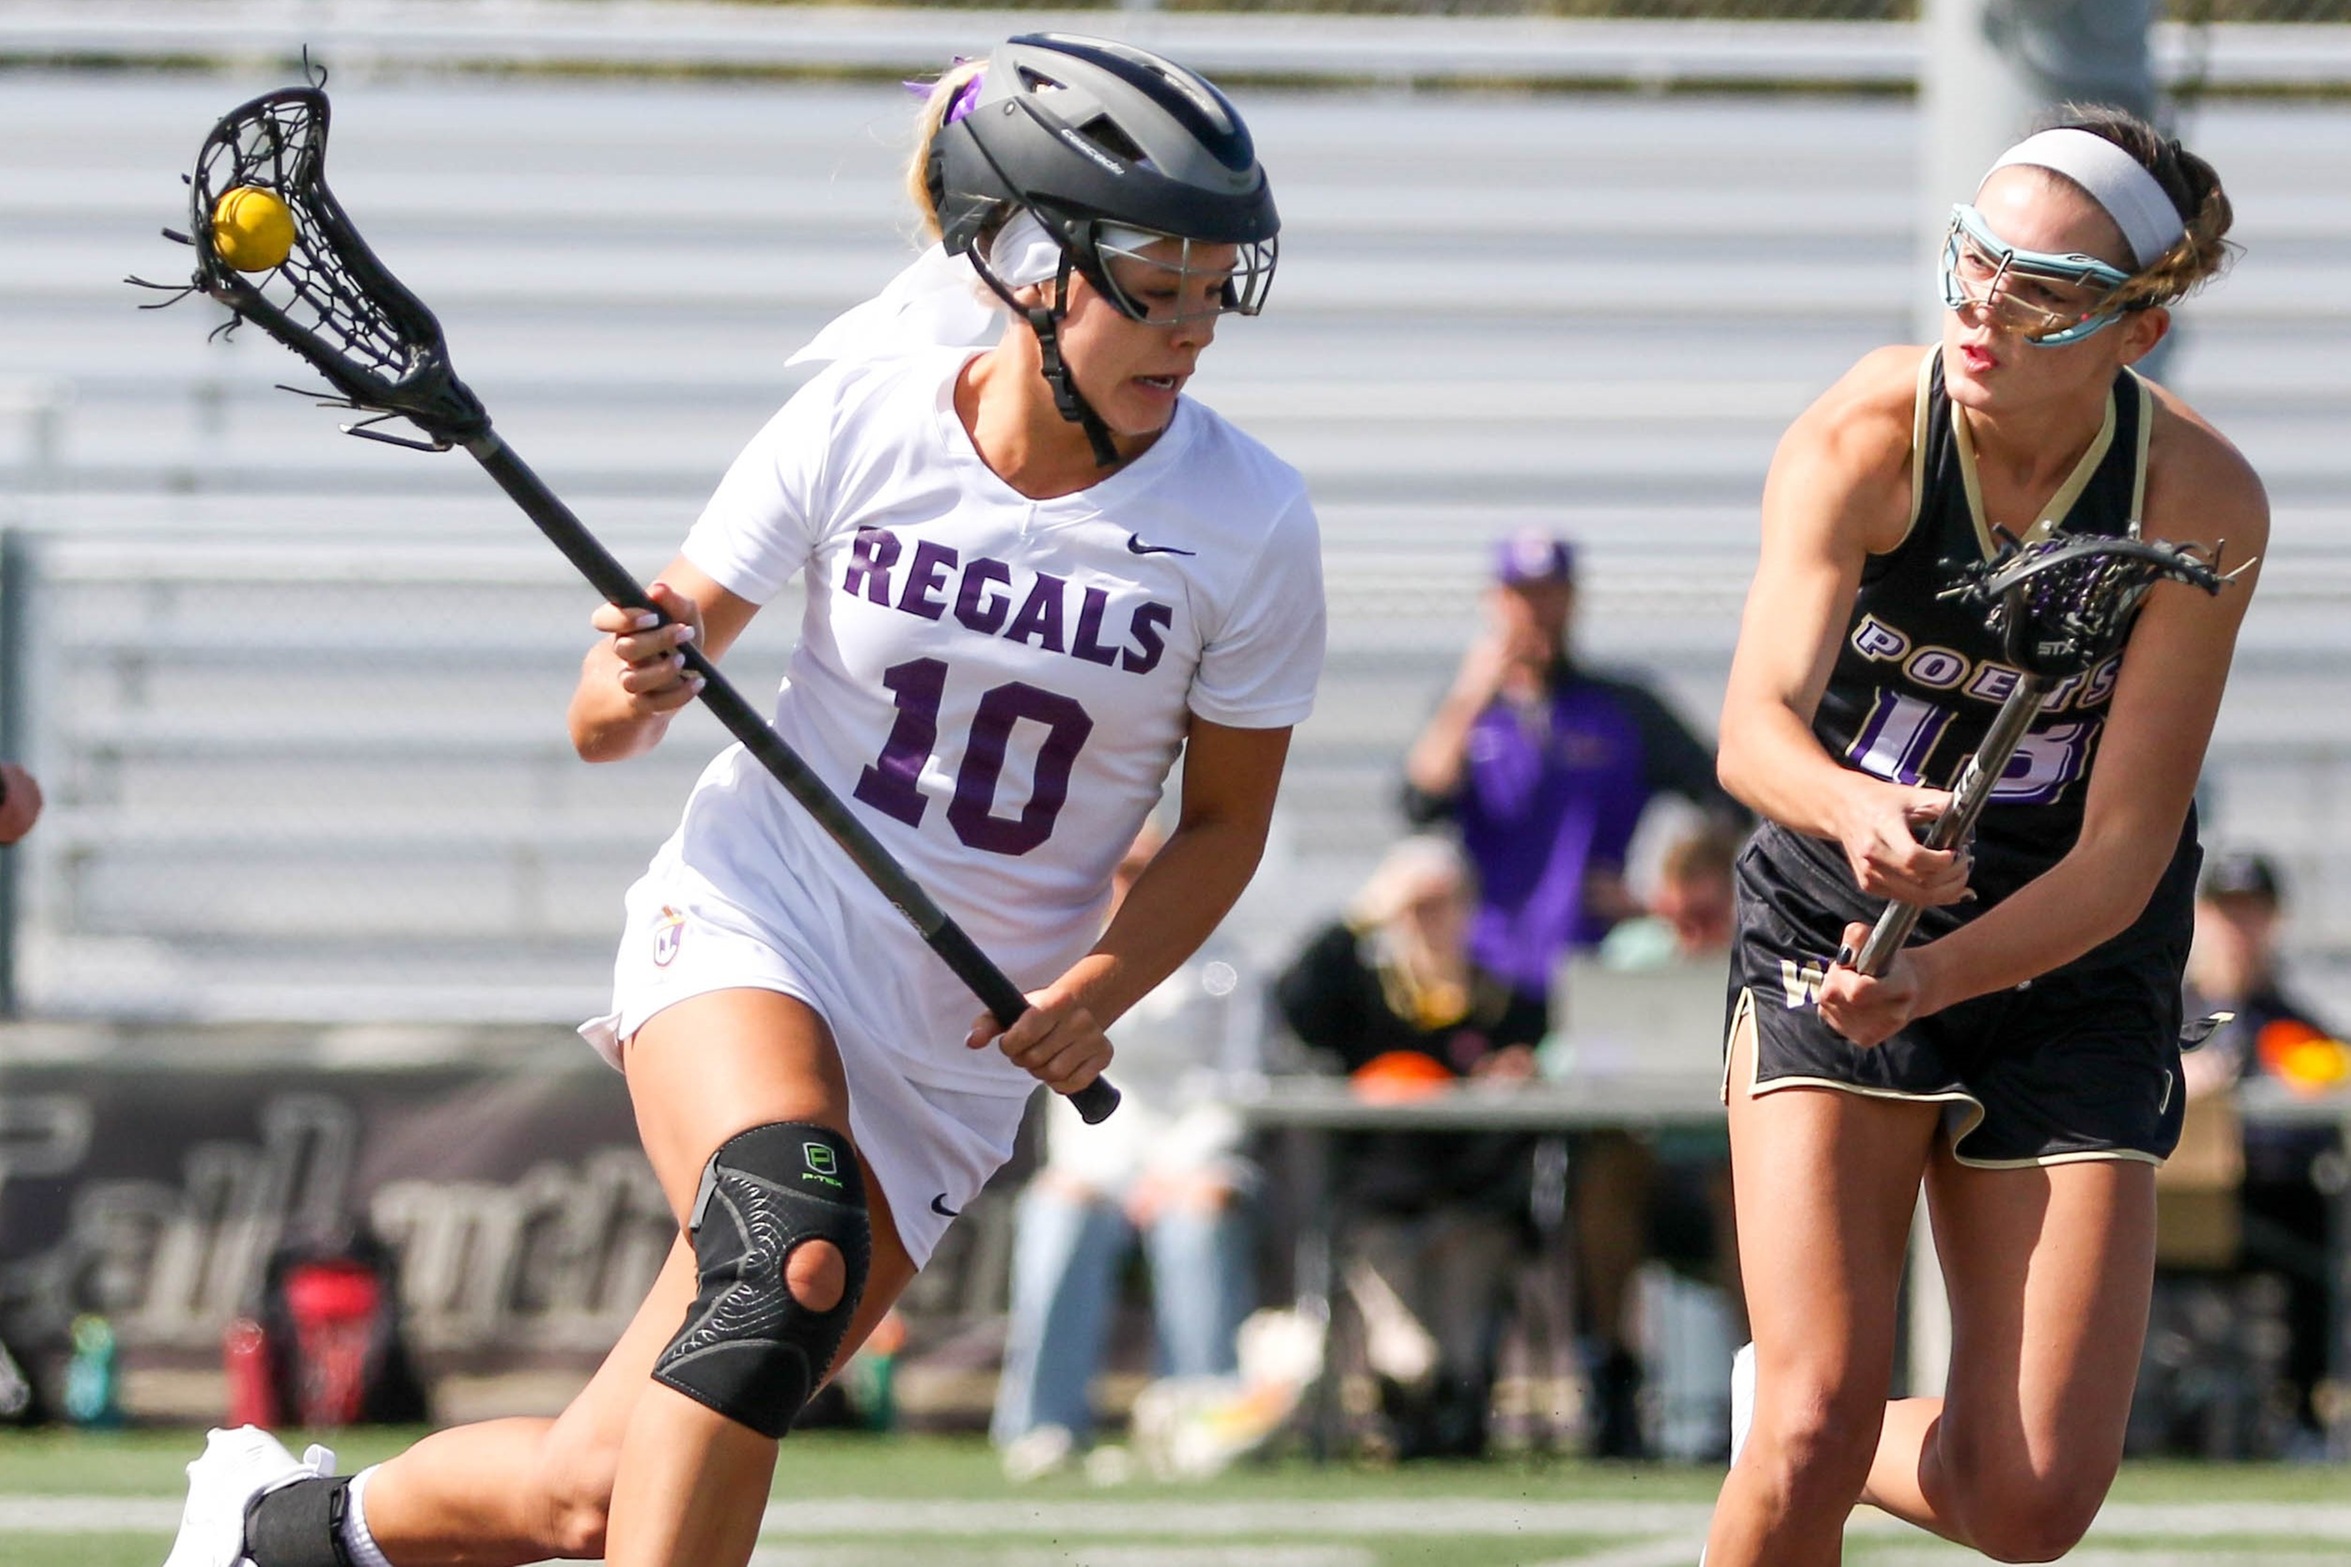 Regals Lacrosse Returns to the Field After 717 Days, Falling to Whittier 17-5